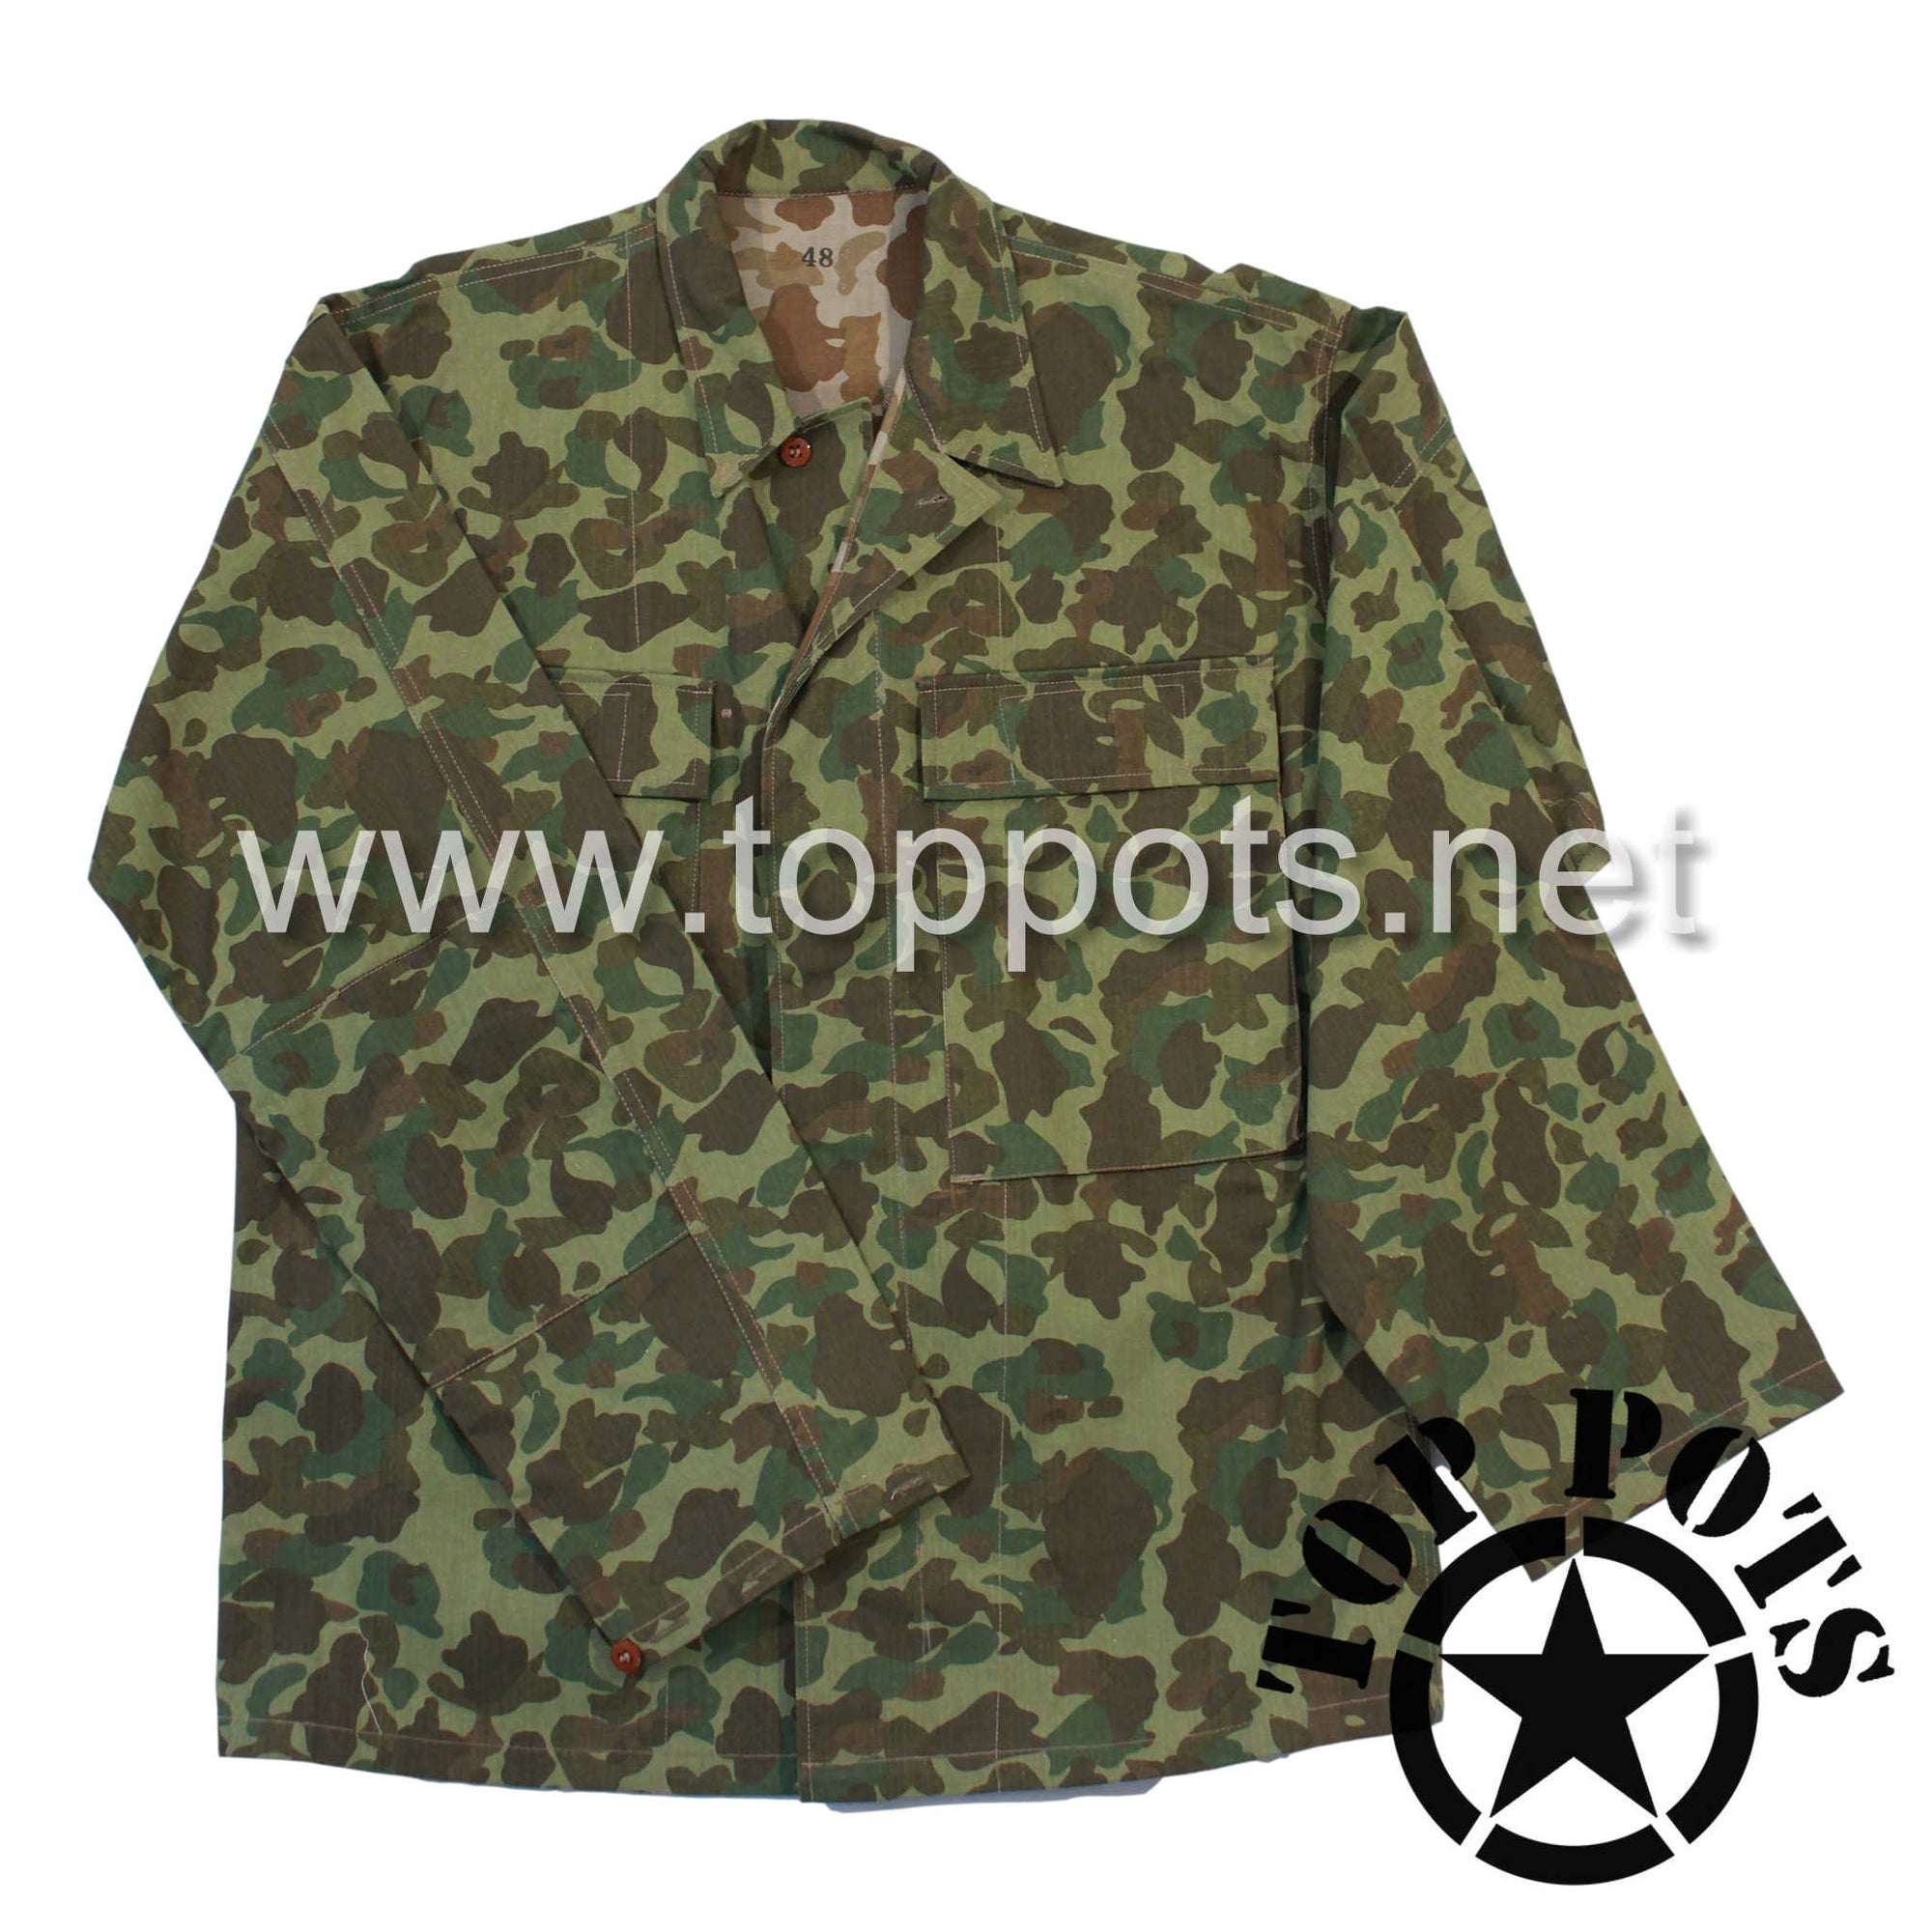 WWII US Army Reproduction M1942 Cotton HBT Uniform Herring Bone Twill Camouflage Field Fatigue Jacket